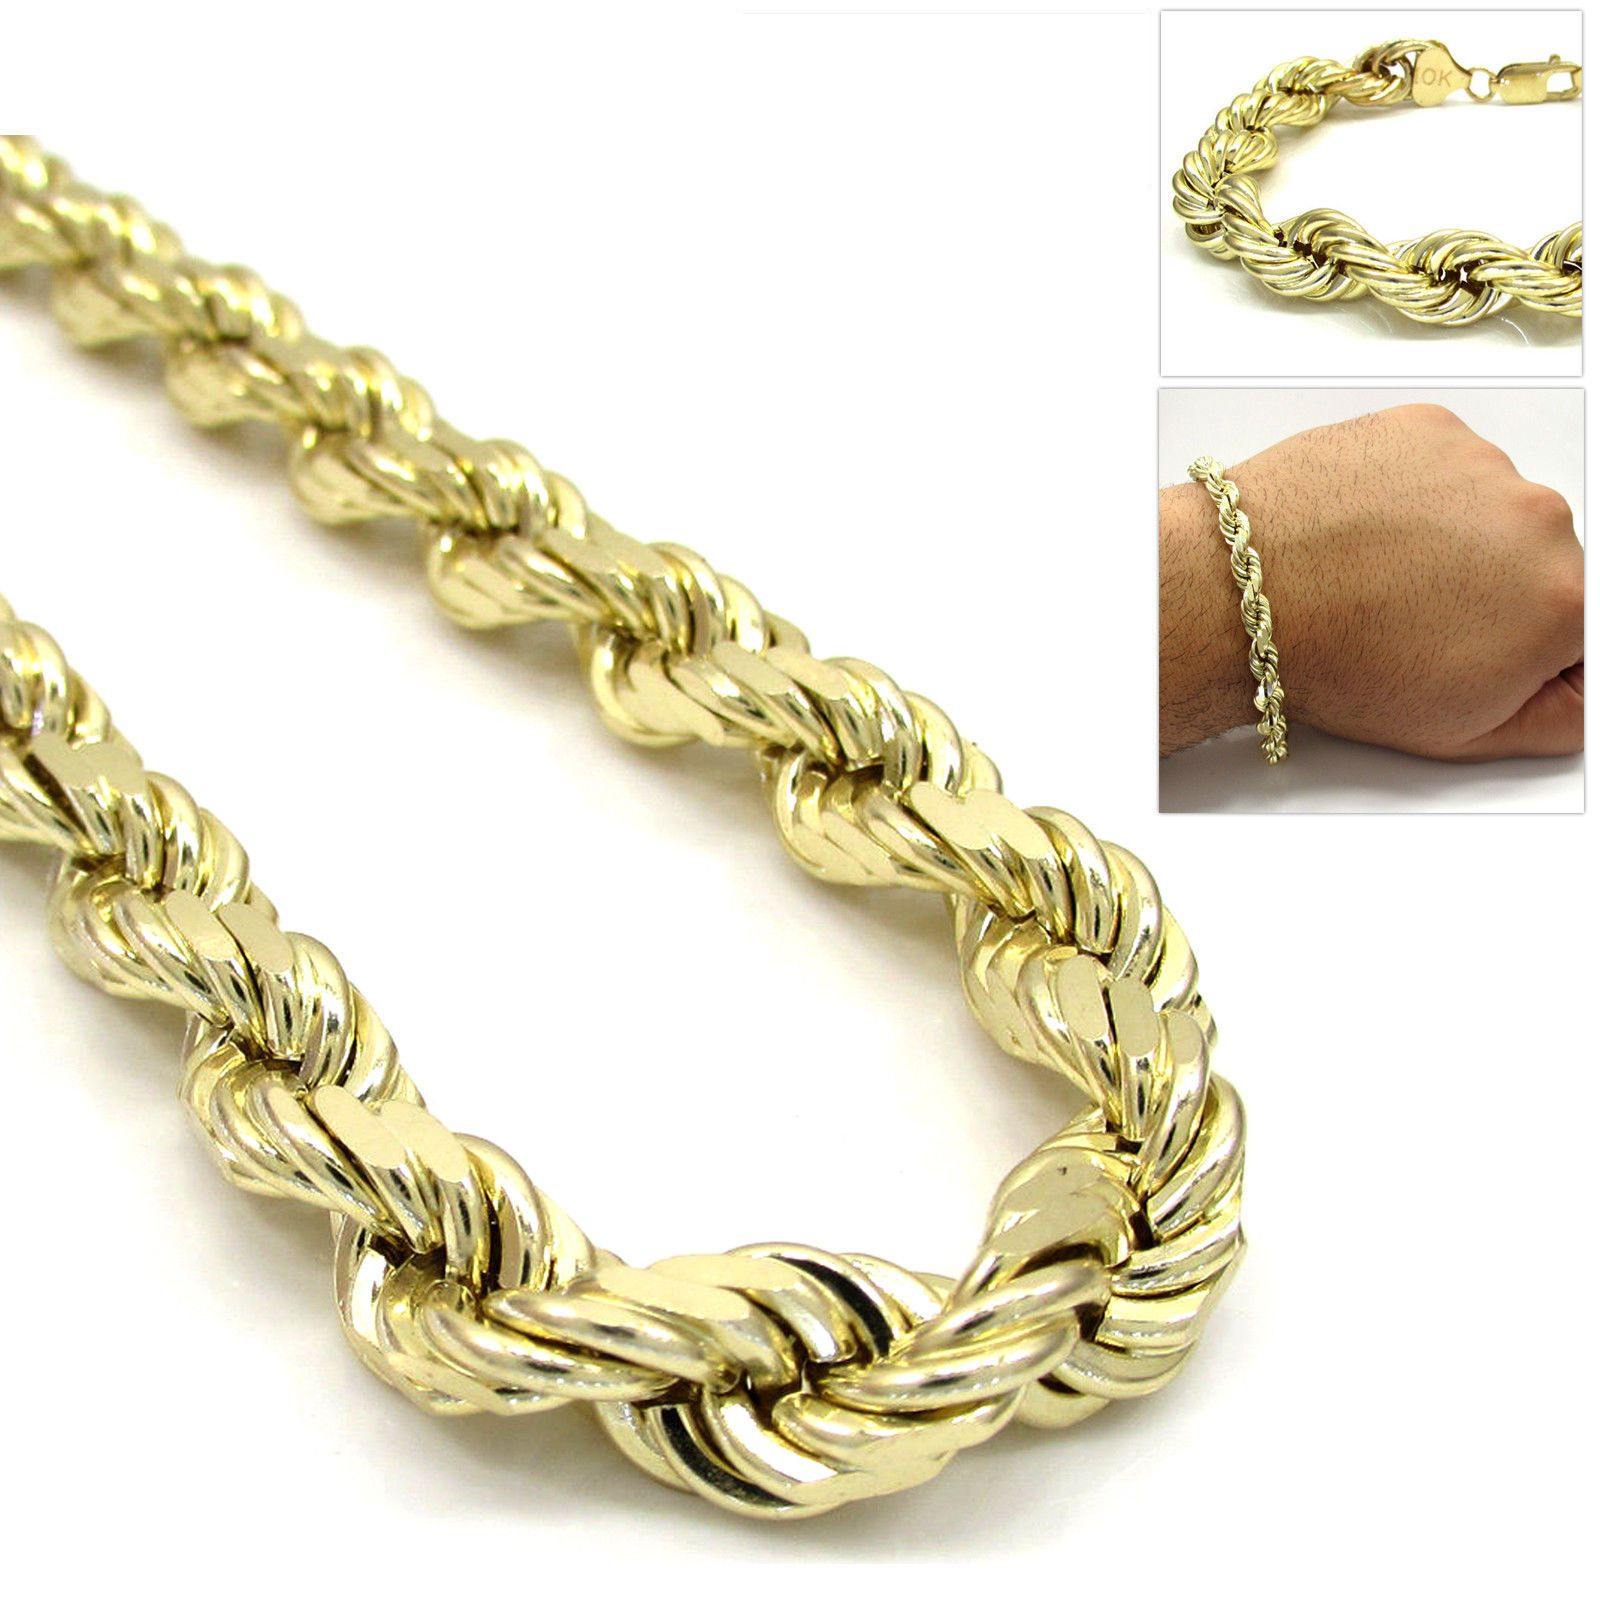 10k Yellow Gold Hollow Rope Link 24 Inches 5mm Assortment of Rope Links  63385